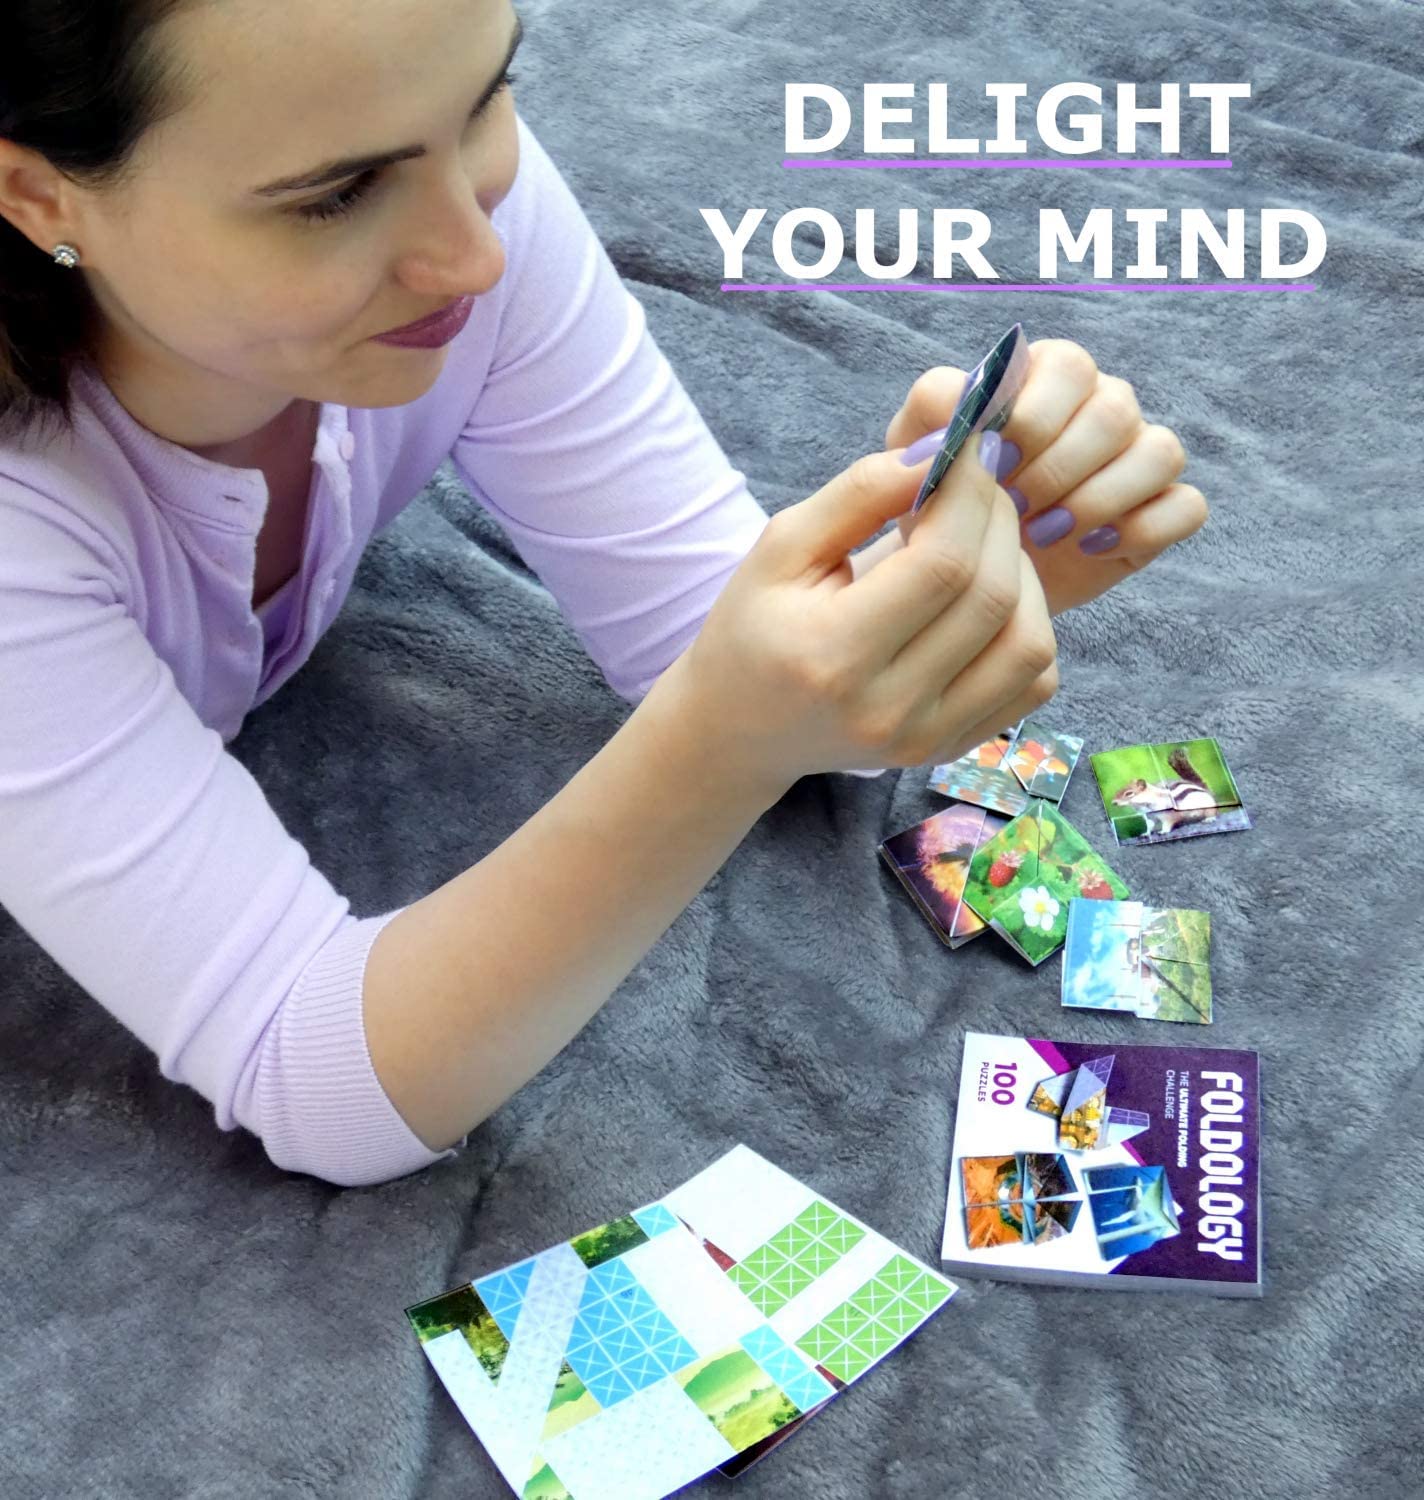 Foldology - The Origami Puzzle Game! Hands-On Brain Teasers for Teens & Adults